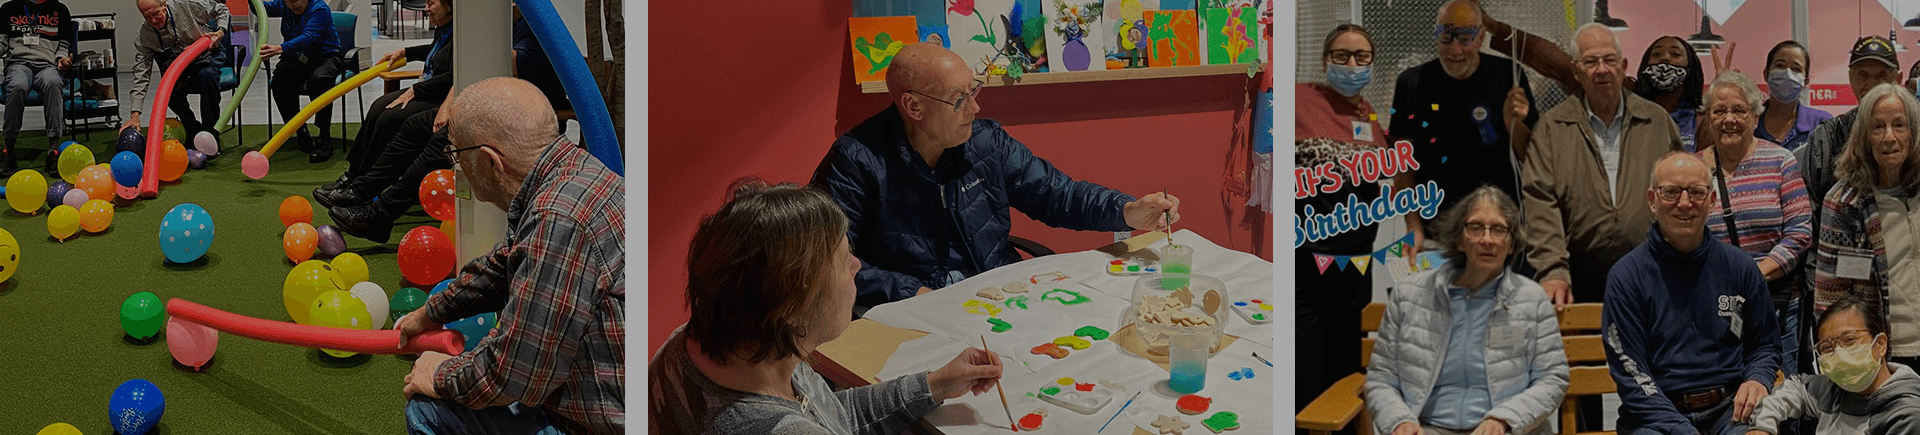 Engaging Activities for Seniors with Dementia: How to Improve Mood and Keep Busy